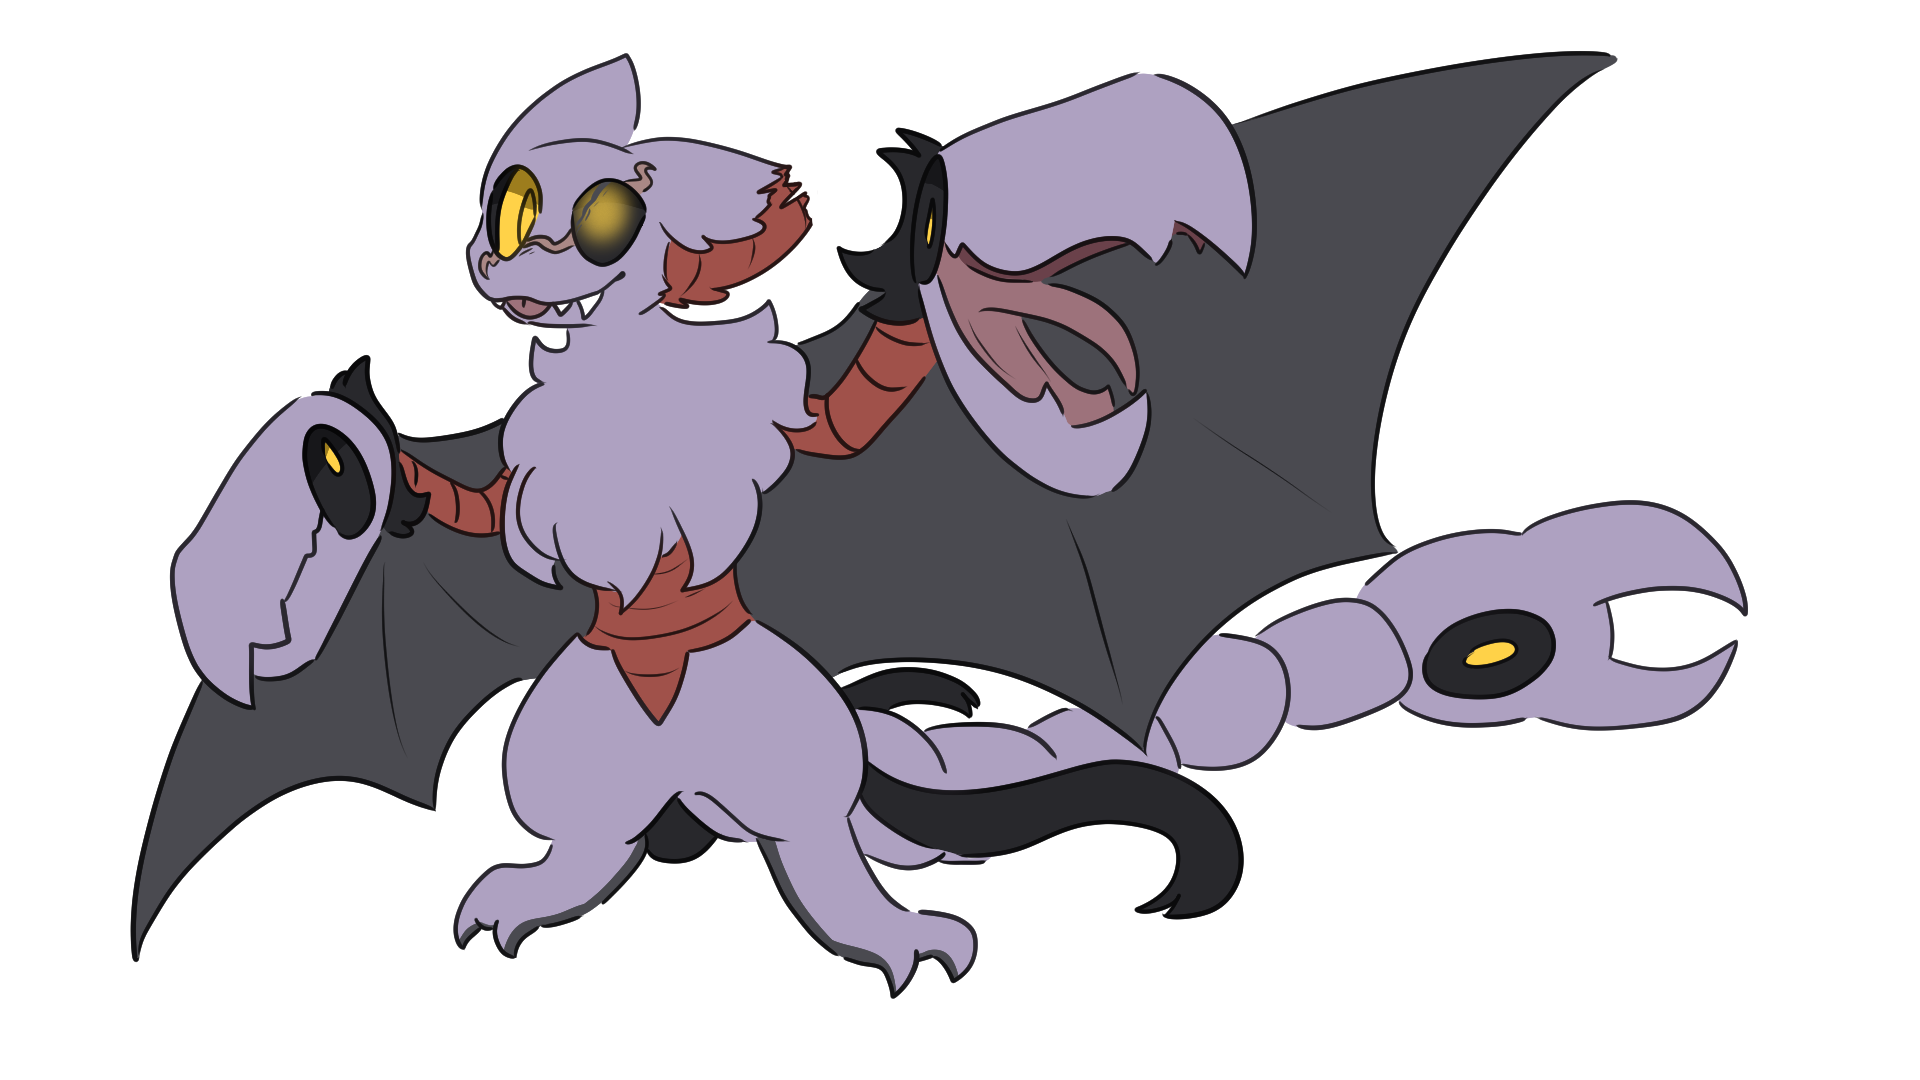 A Gliscor with Hydreigon traits, such as claw "head" mouths and plumes.